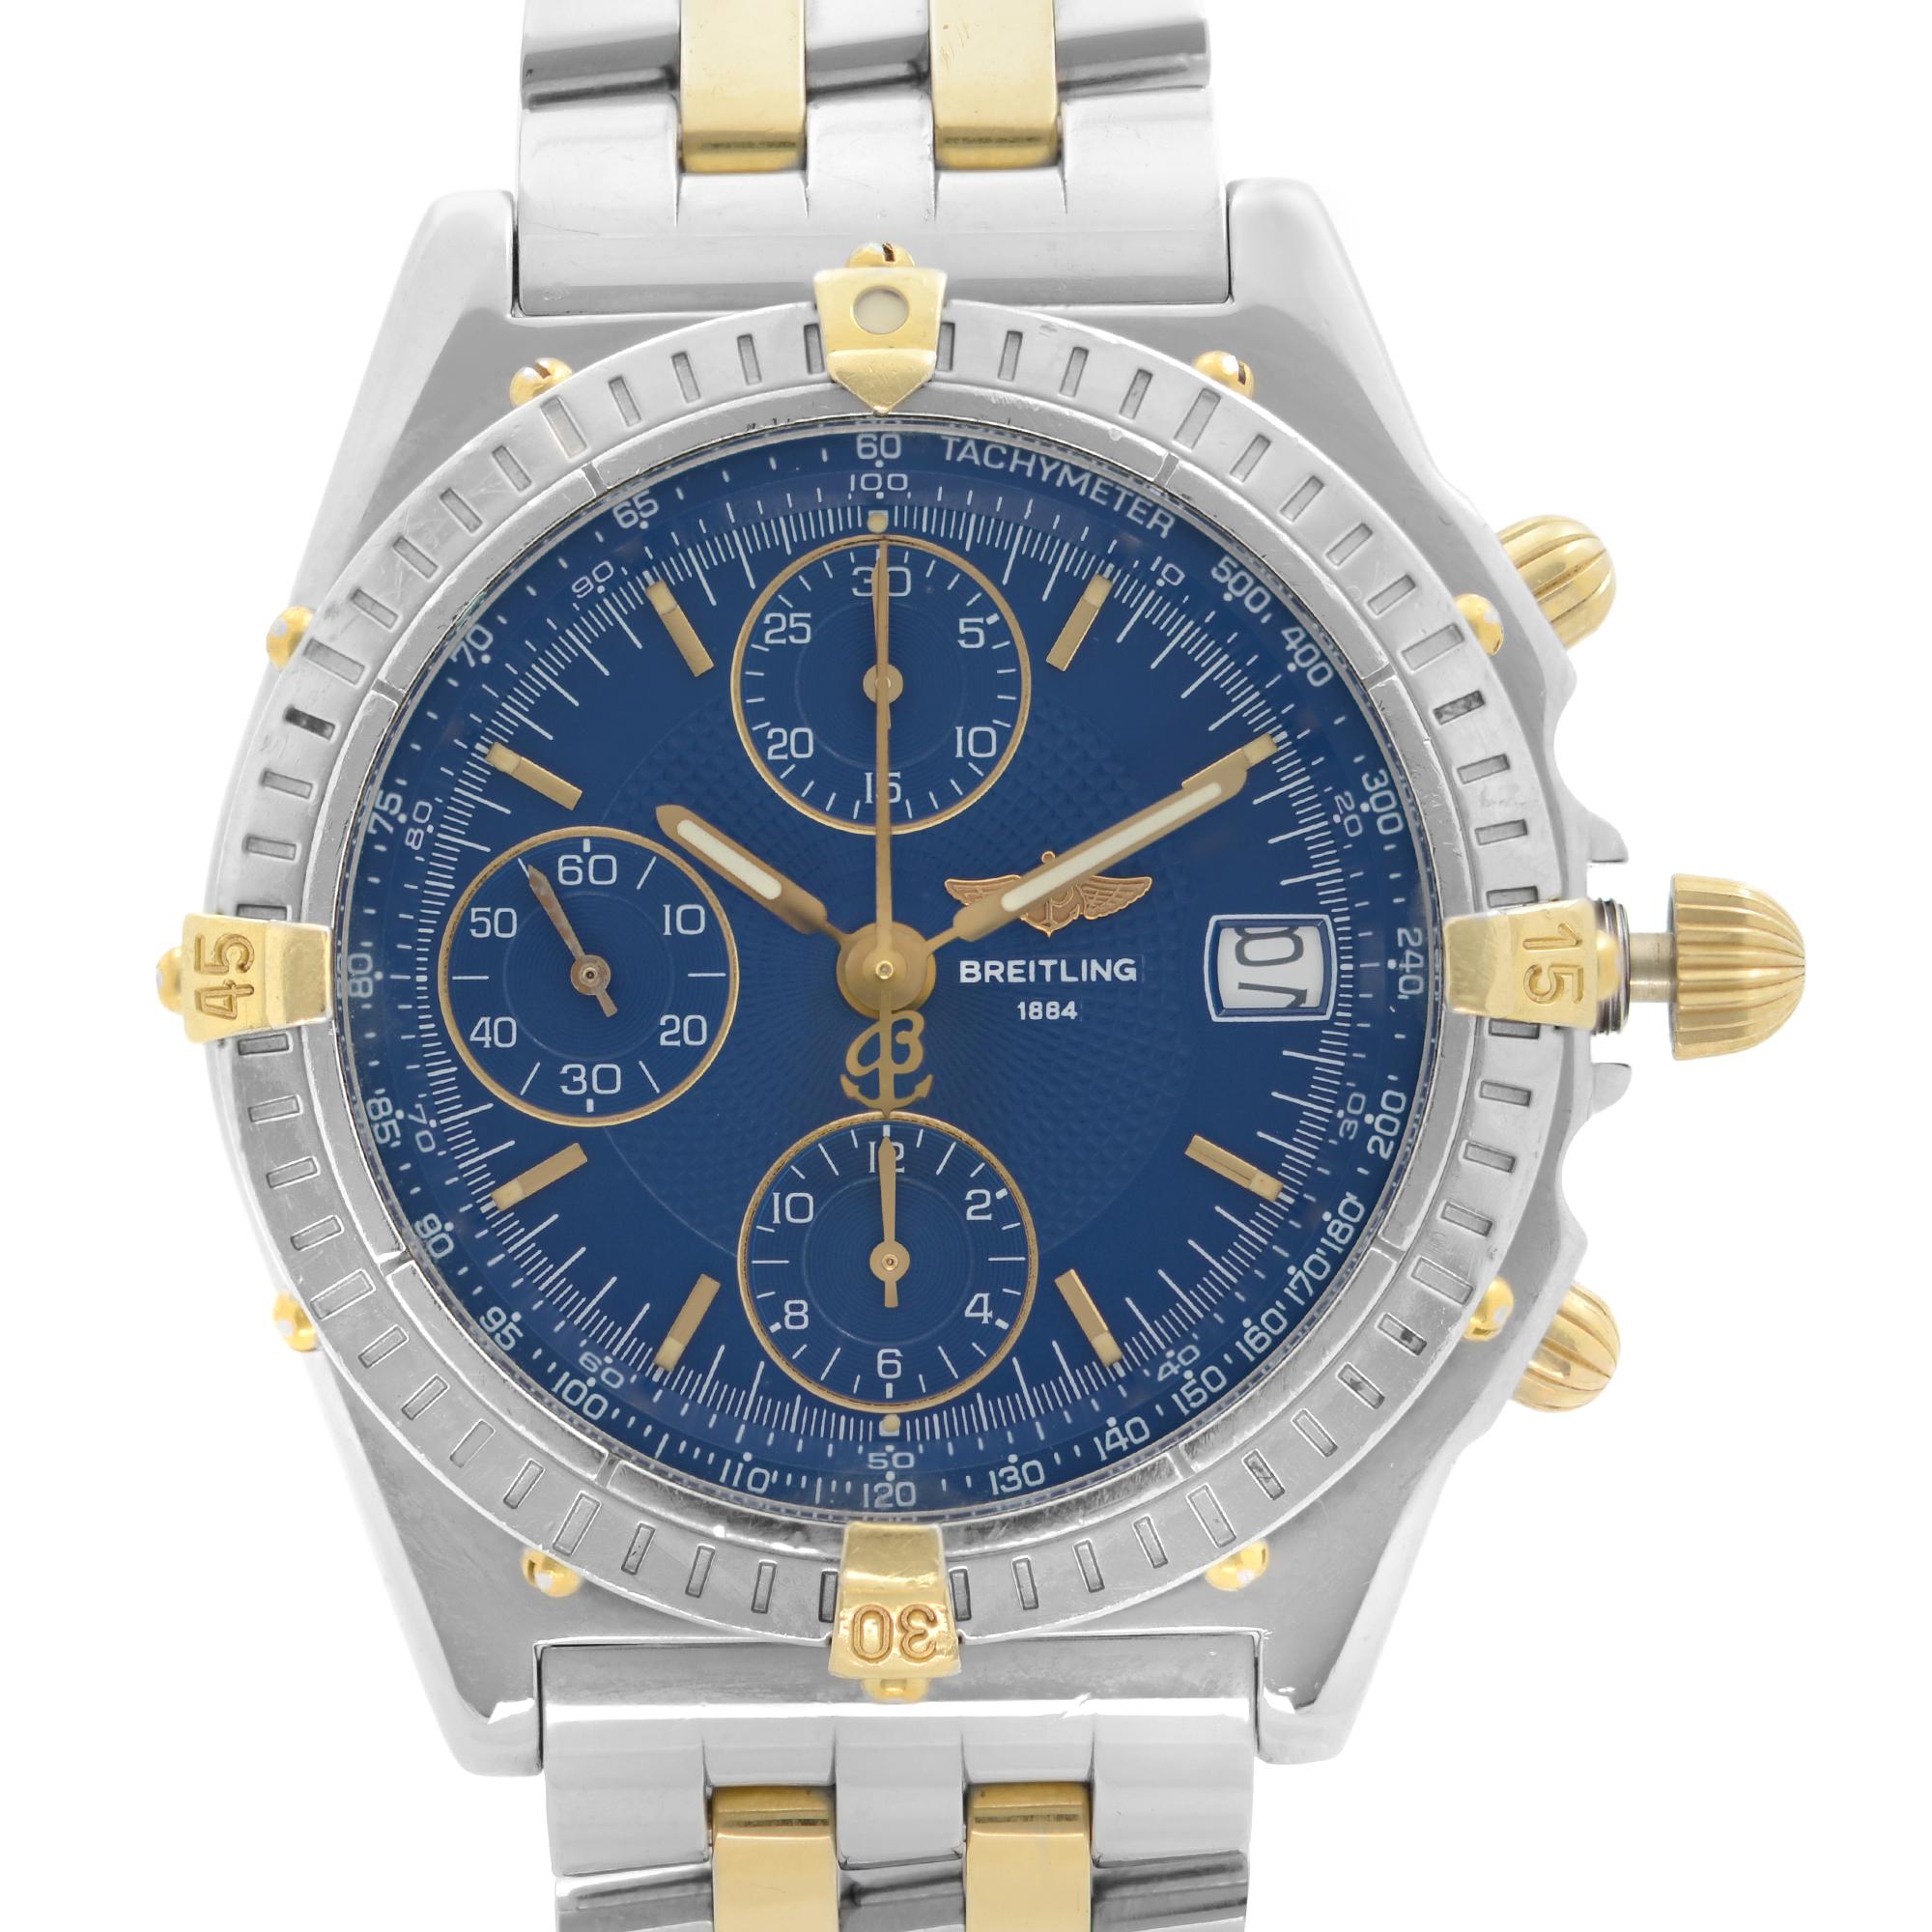 Pre-owned Breitling Chronomat 18k Yellow Gold Steel Blue Dial Automatic Men's Watch B13050.1. The Watch Case Shows Minor Dinges on the Sides. No Original Box and Papers are Included. Comes with Chronostore Presentation Box and Authenticity Card.